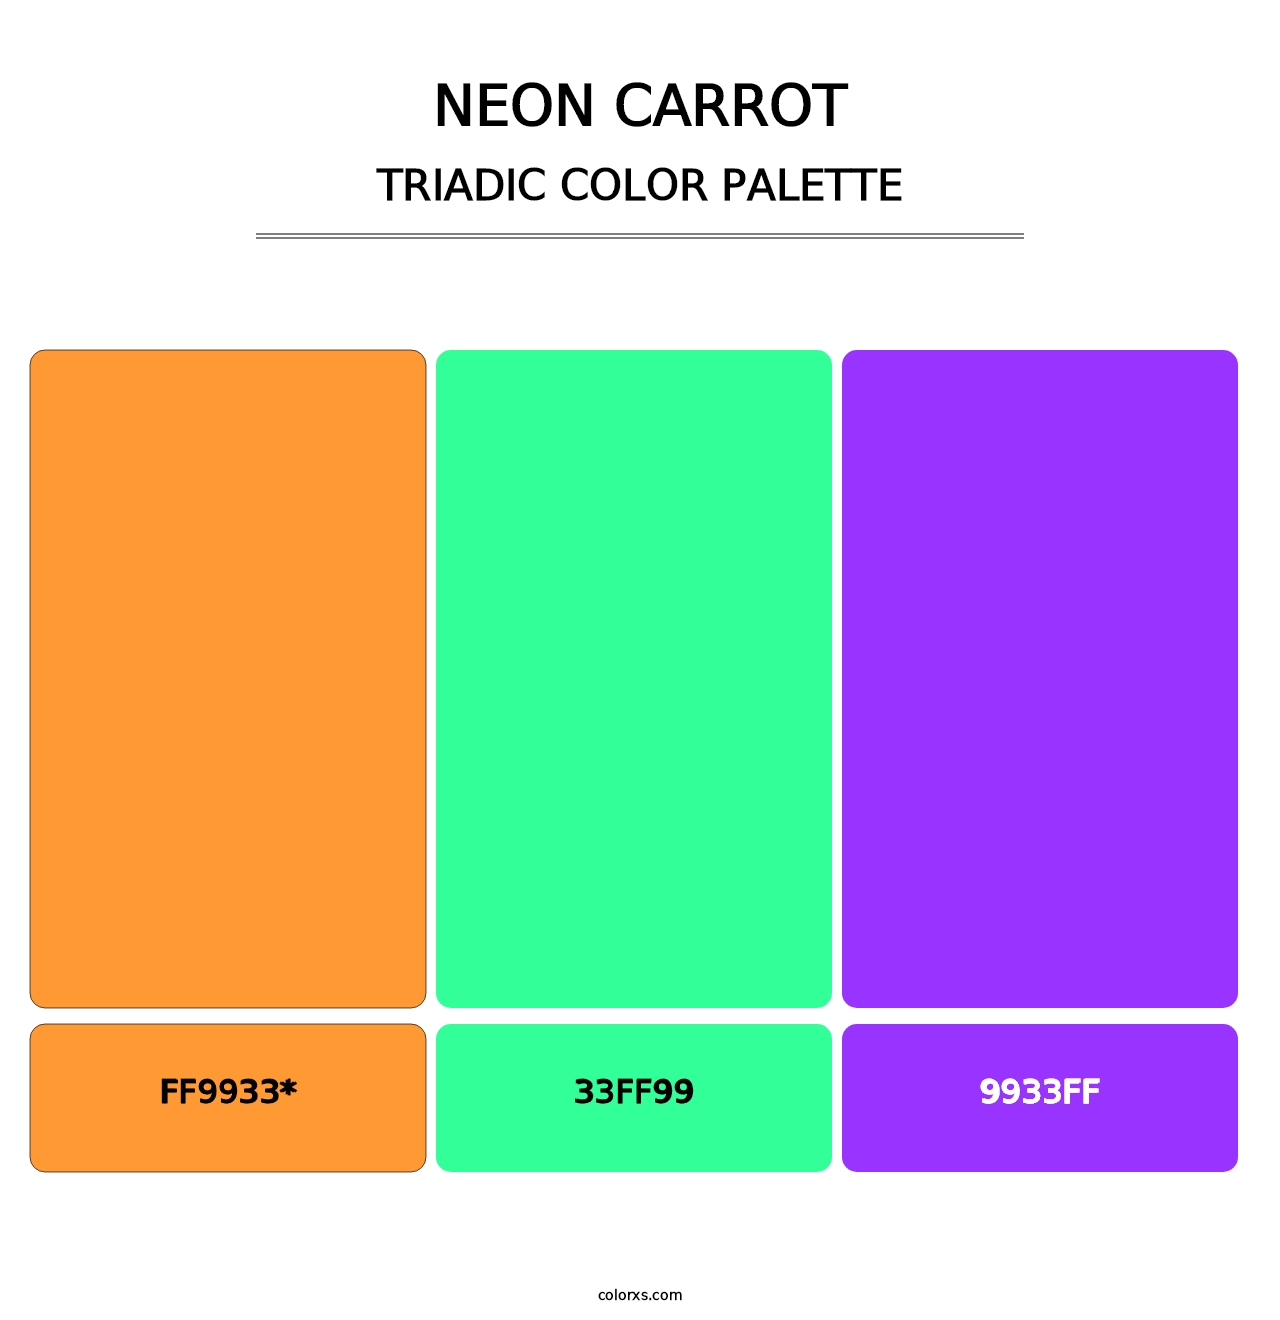 Neon Carrot - Triadic Color Palette